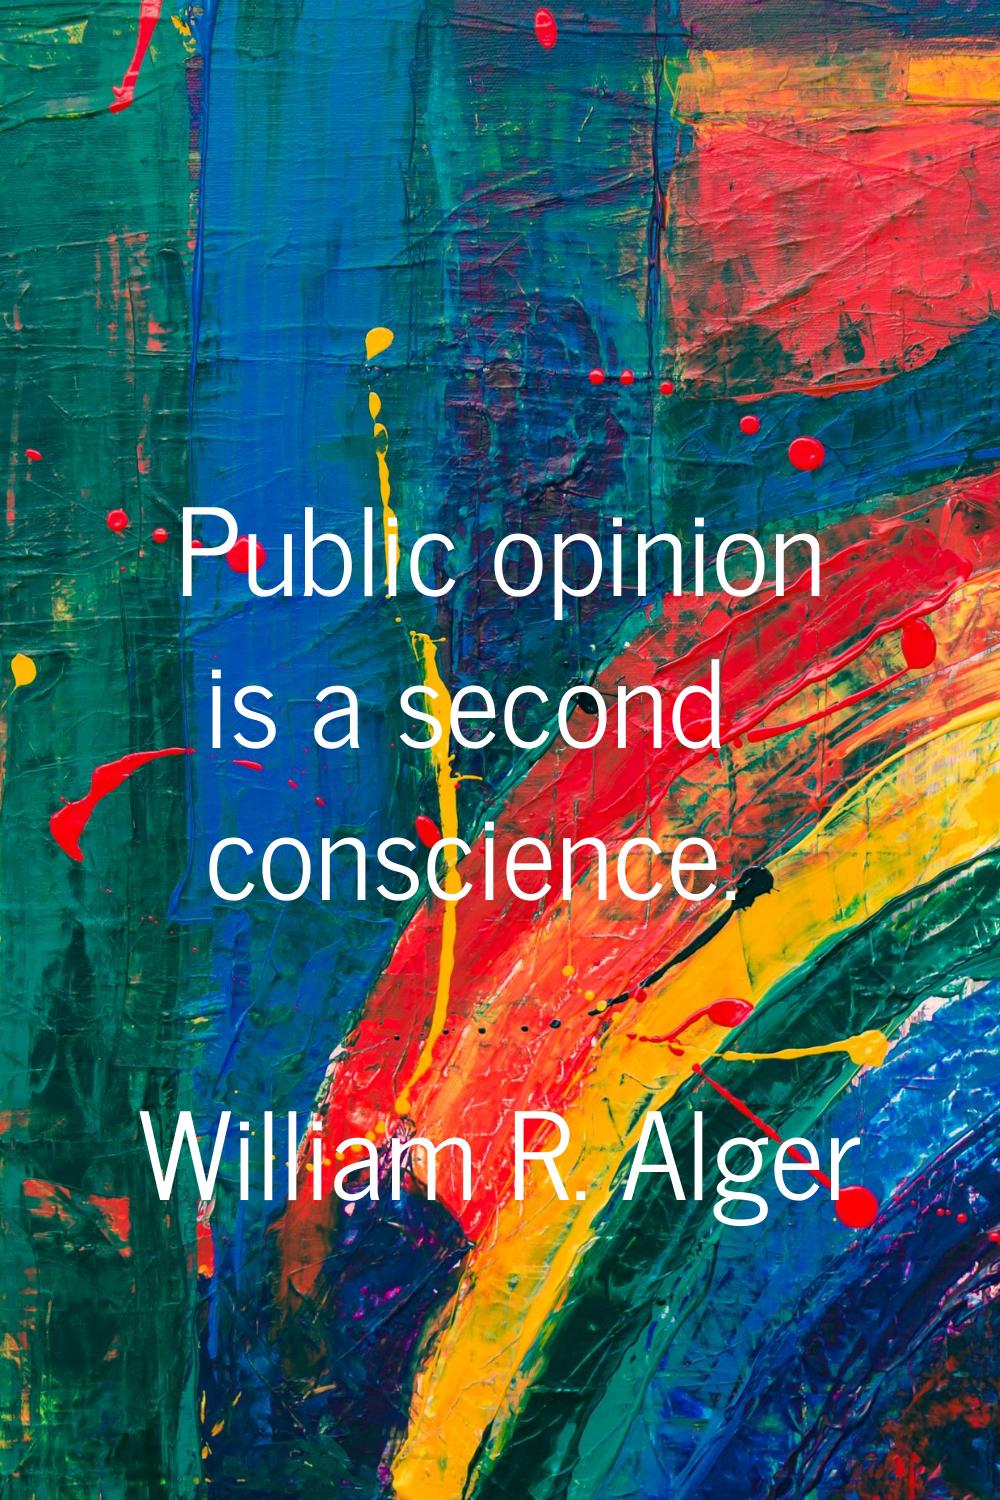 Public opinion is a second conscience.